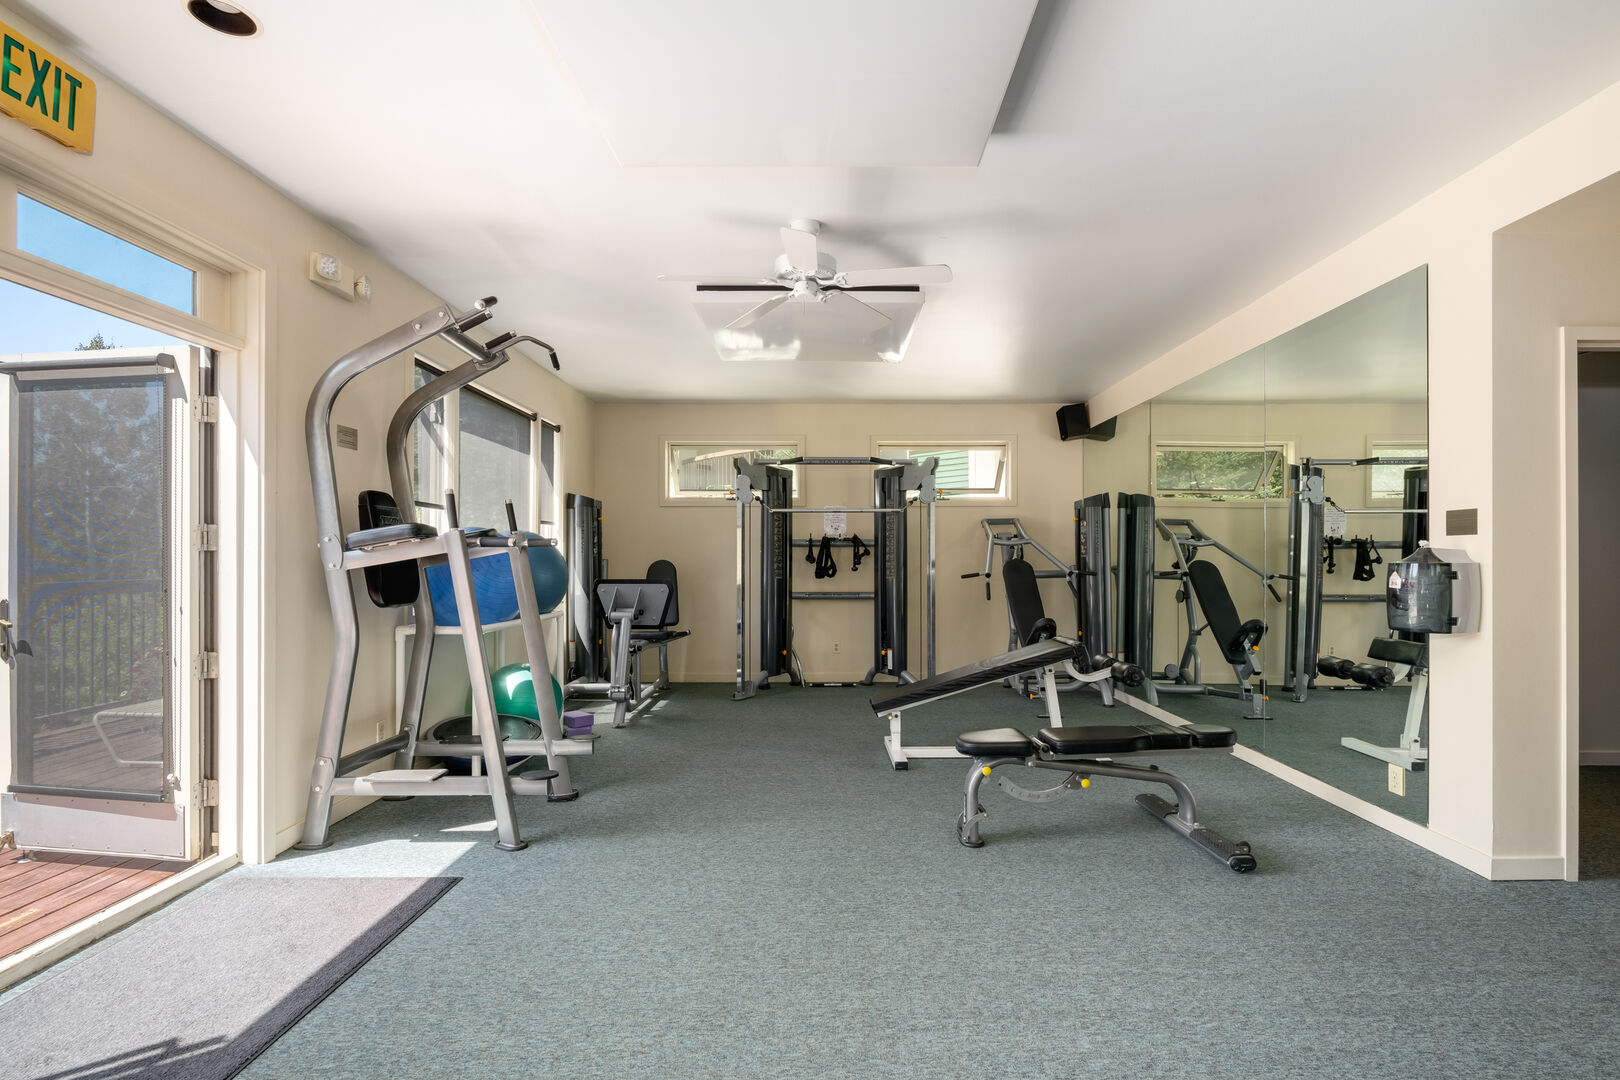 Amenities of the community include a gym